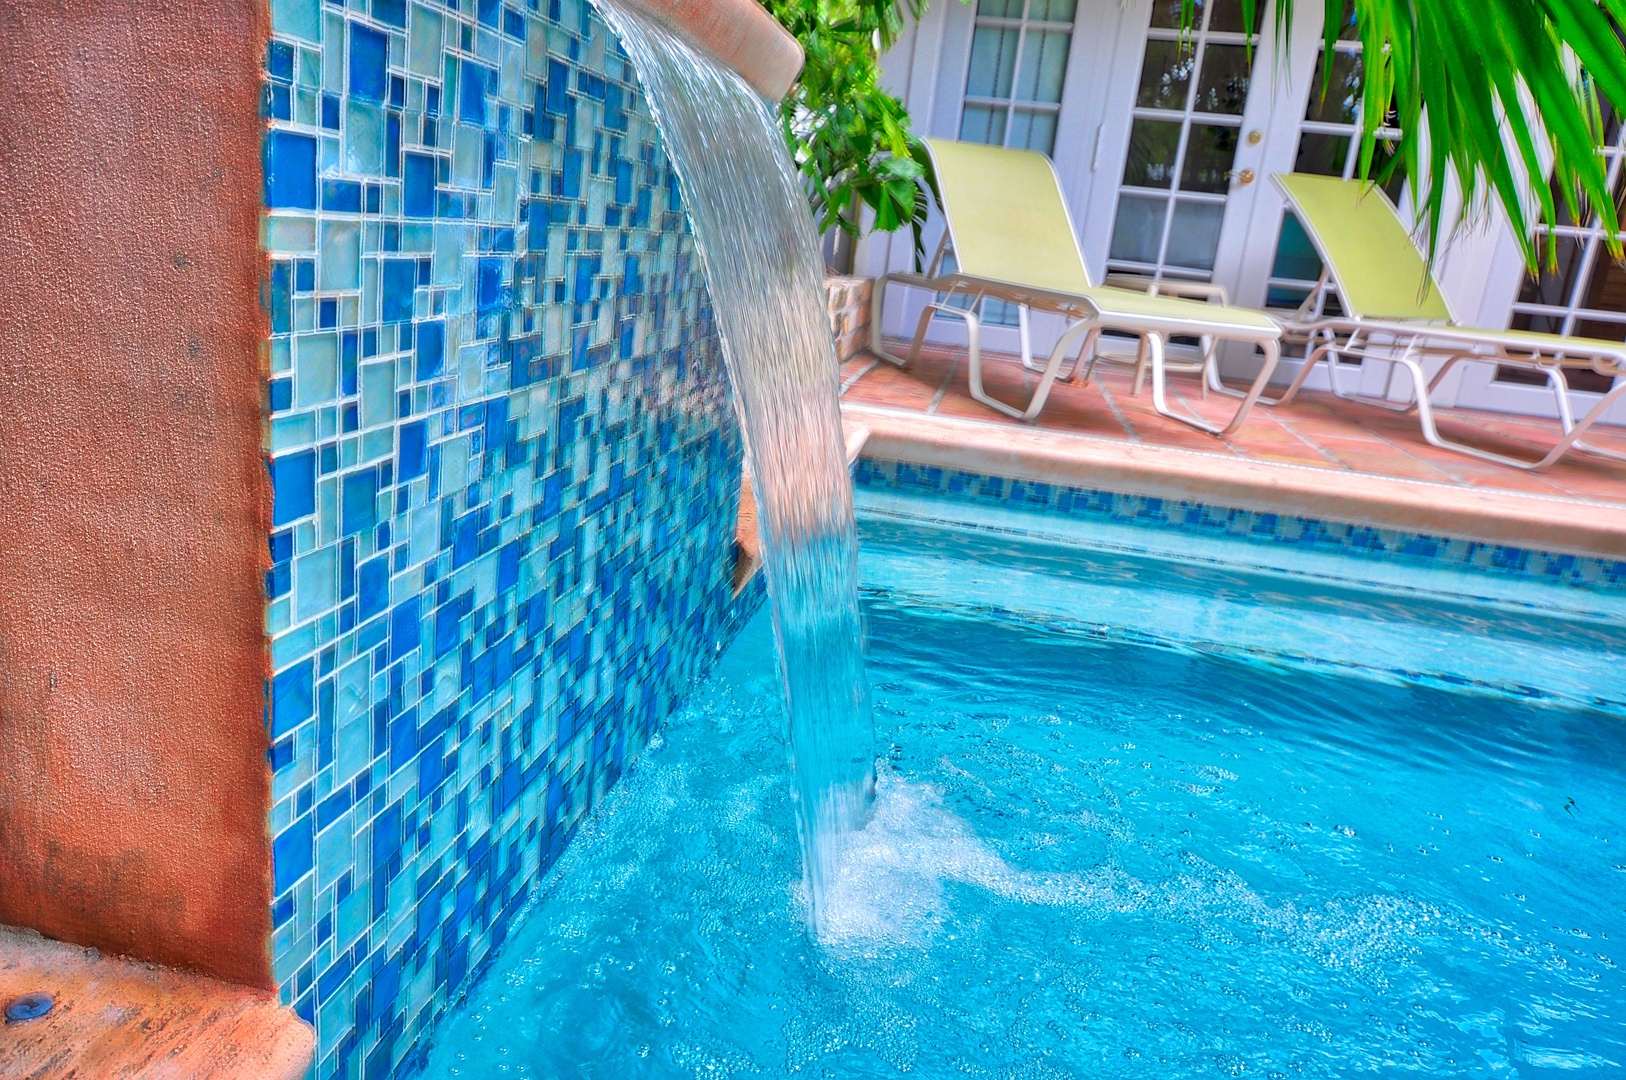 Waterfall in Private Pool Villa Paradiso Key West